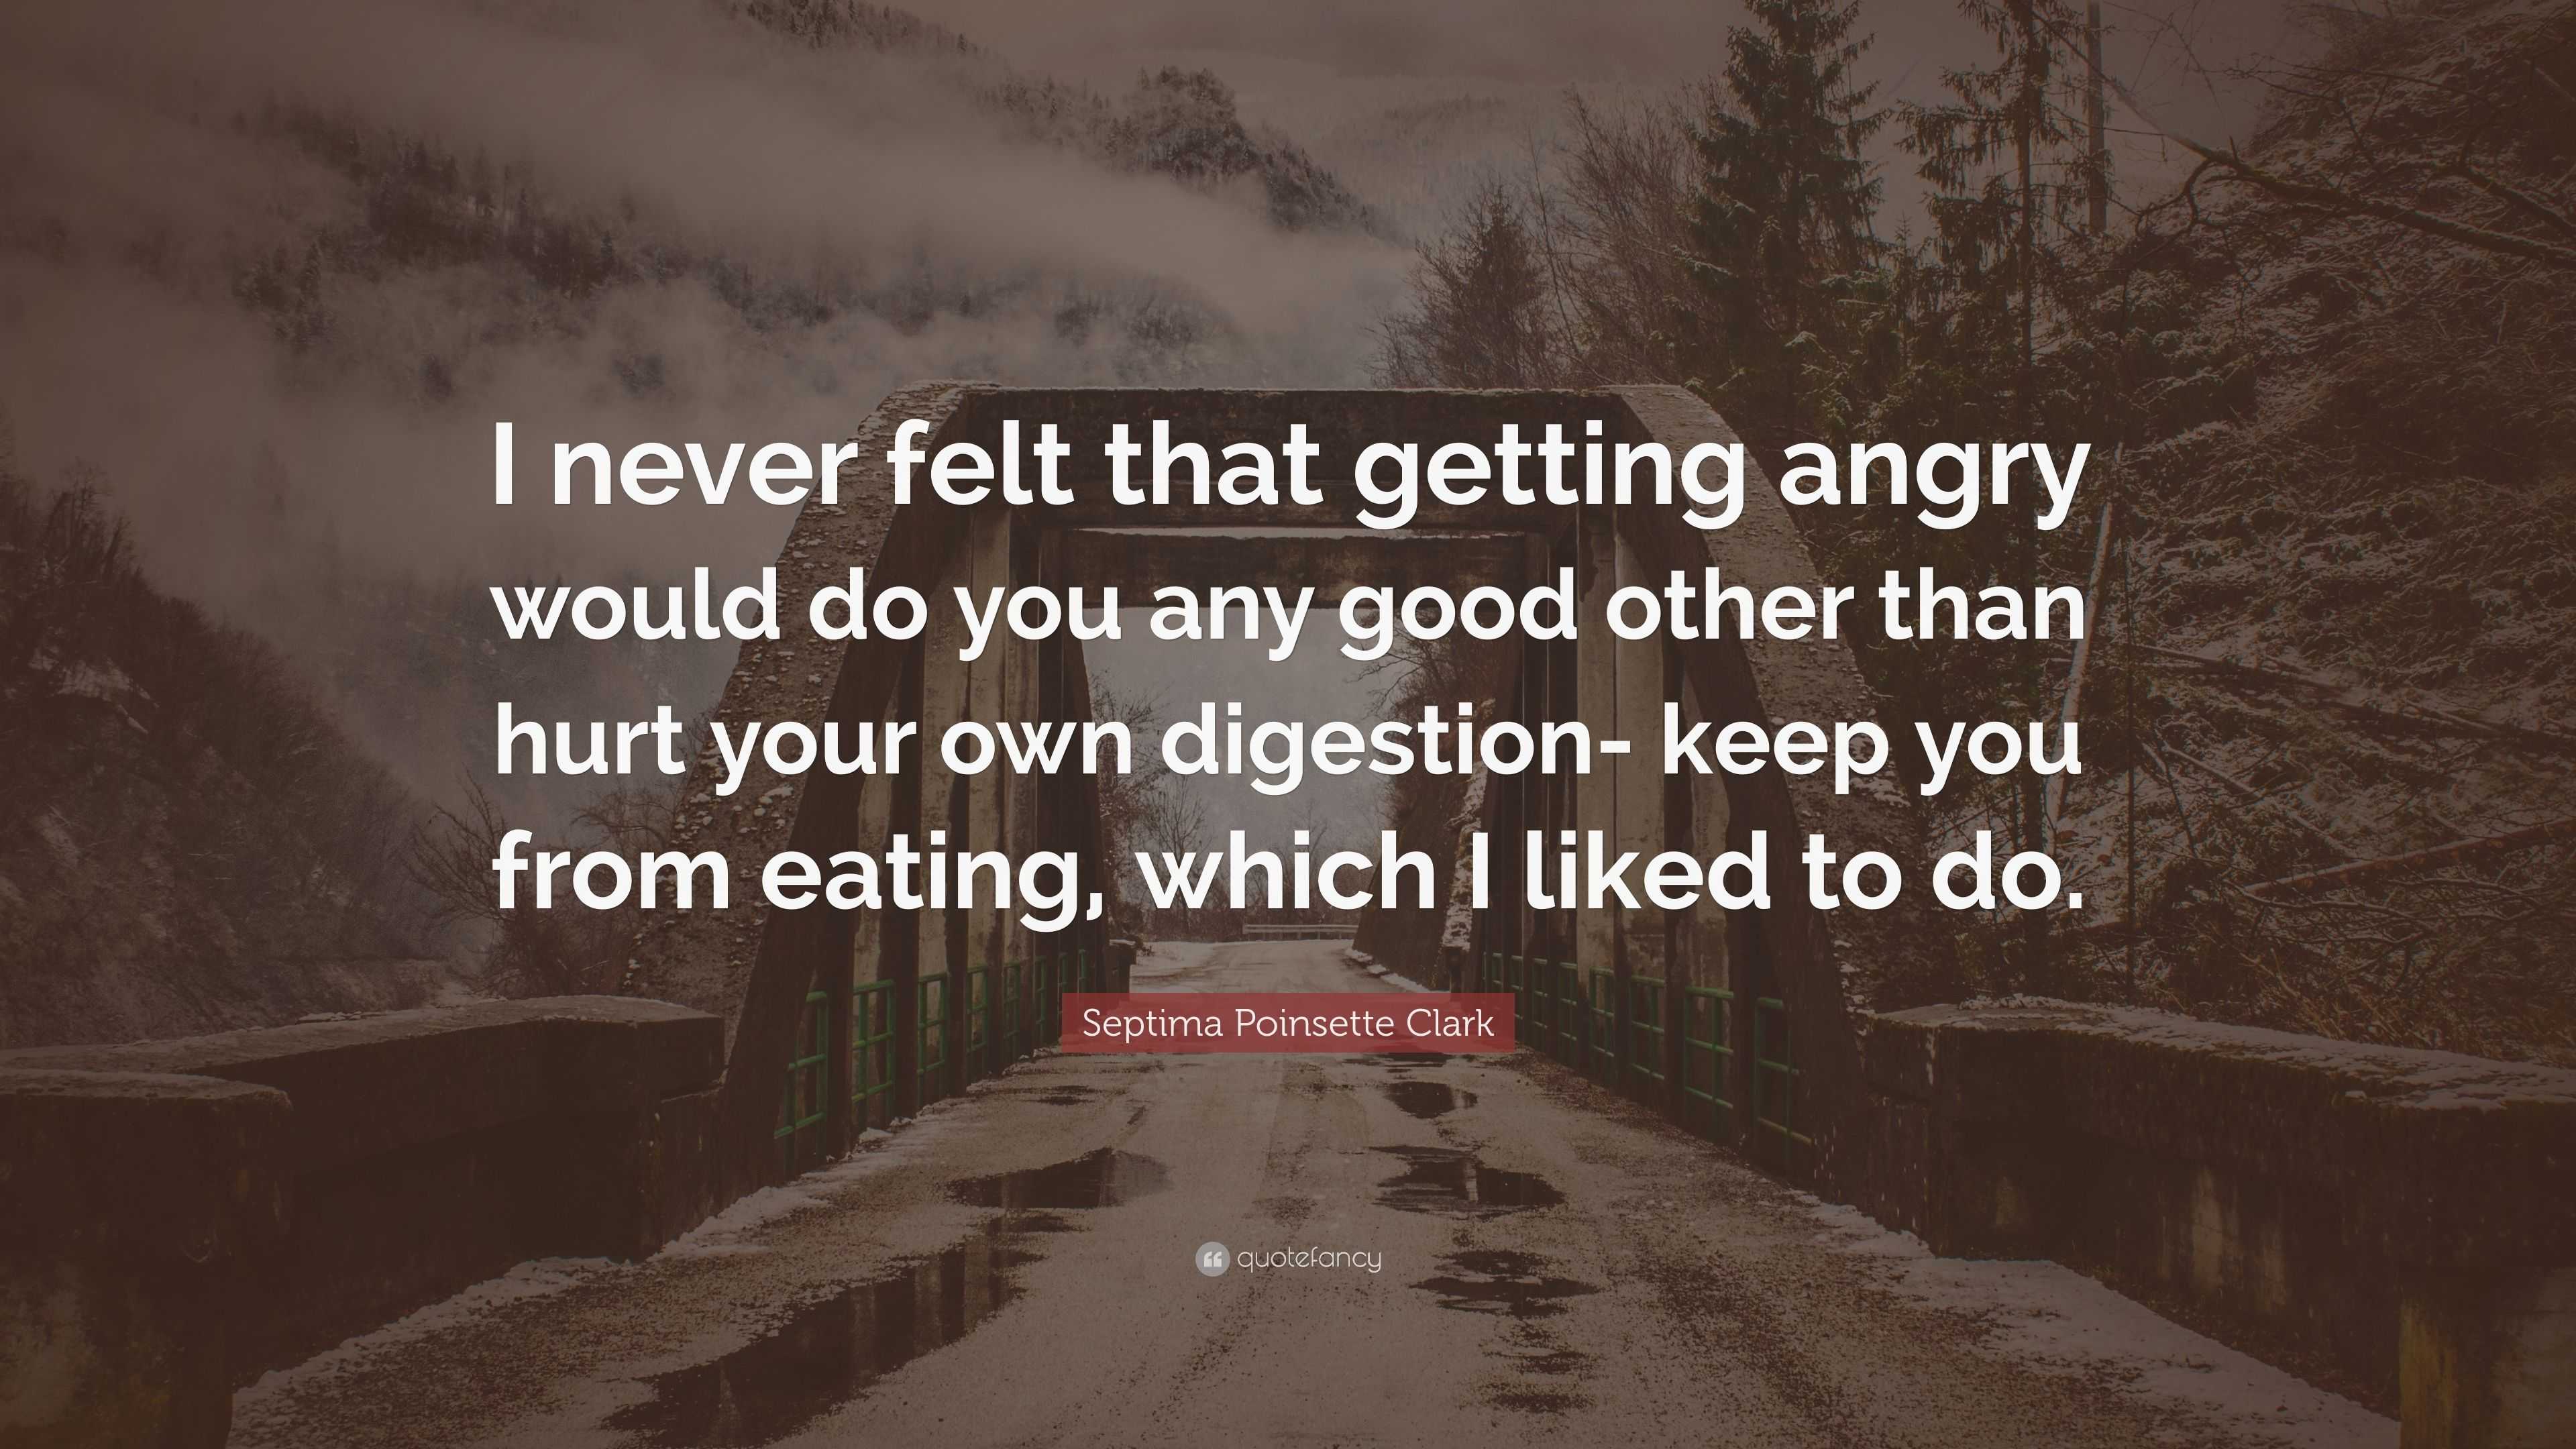 Septima Poinsette Clark Quote: “I never felt that getting angry would ...